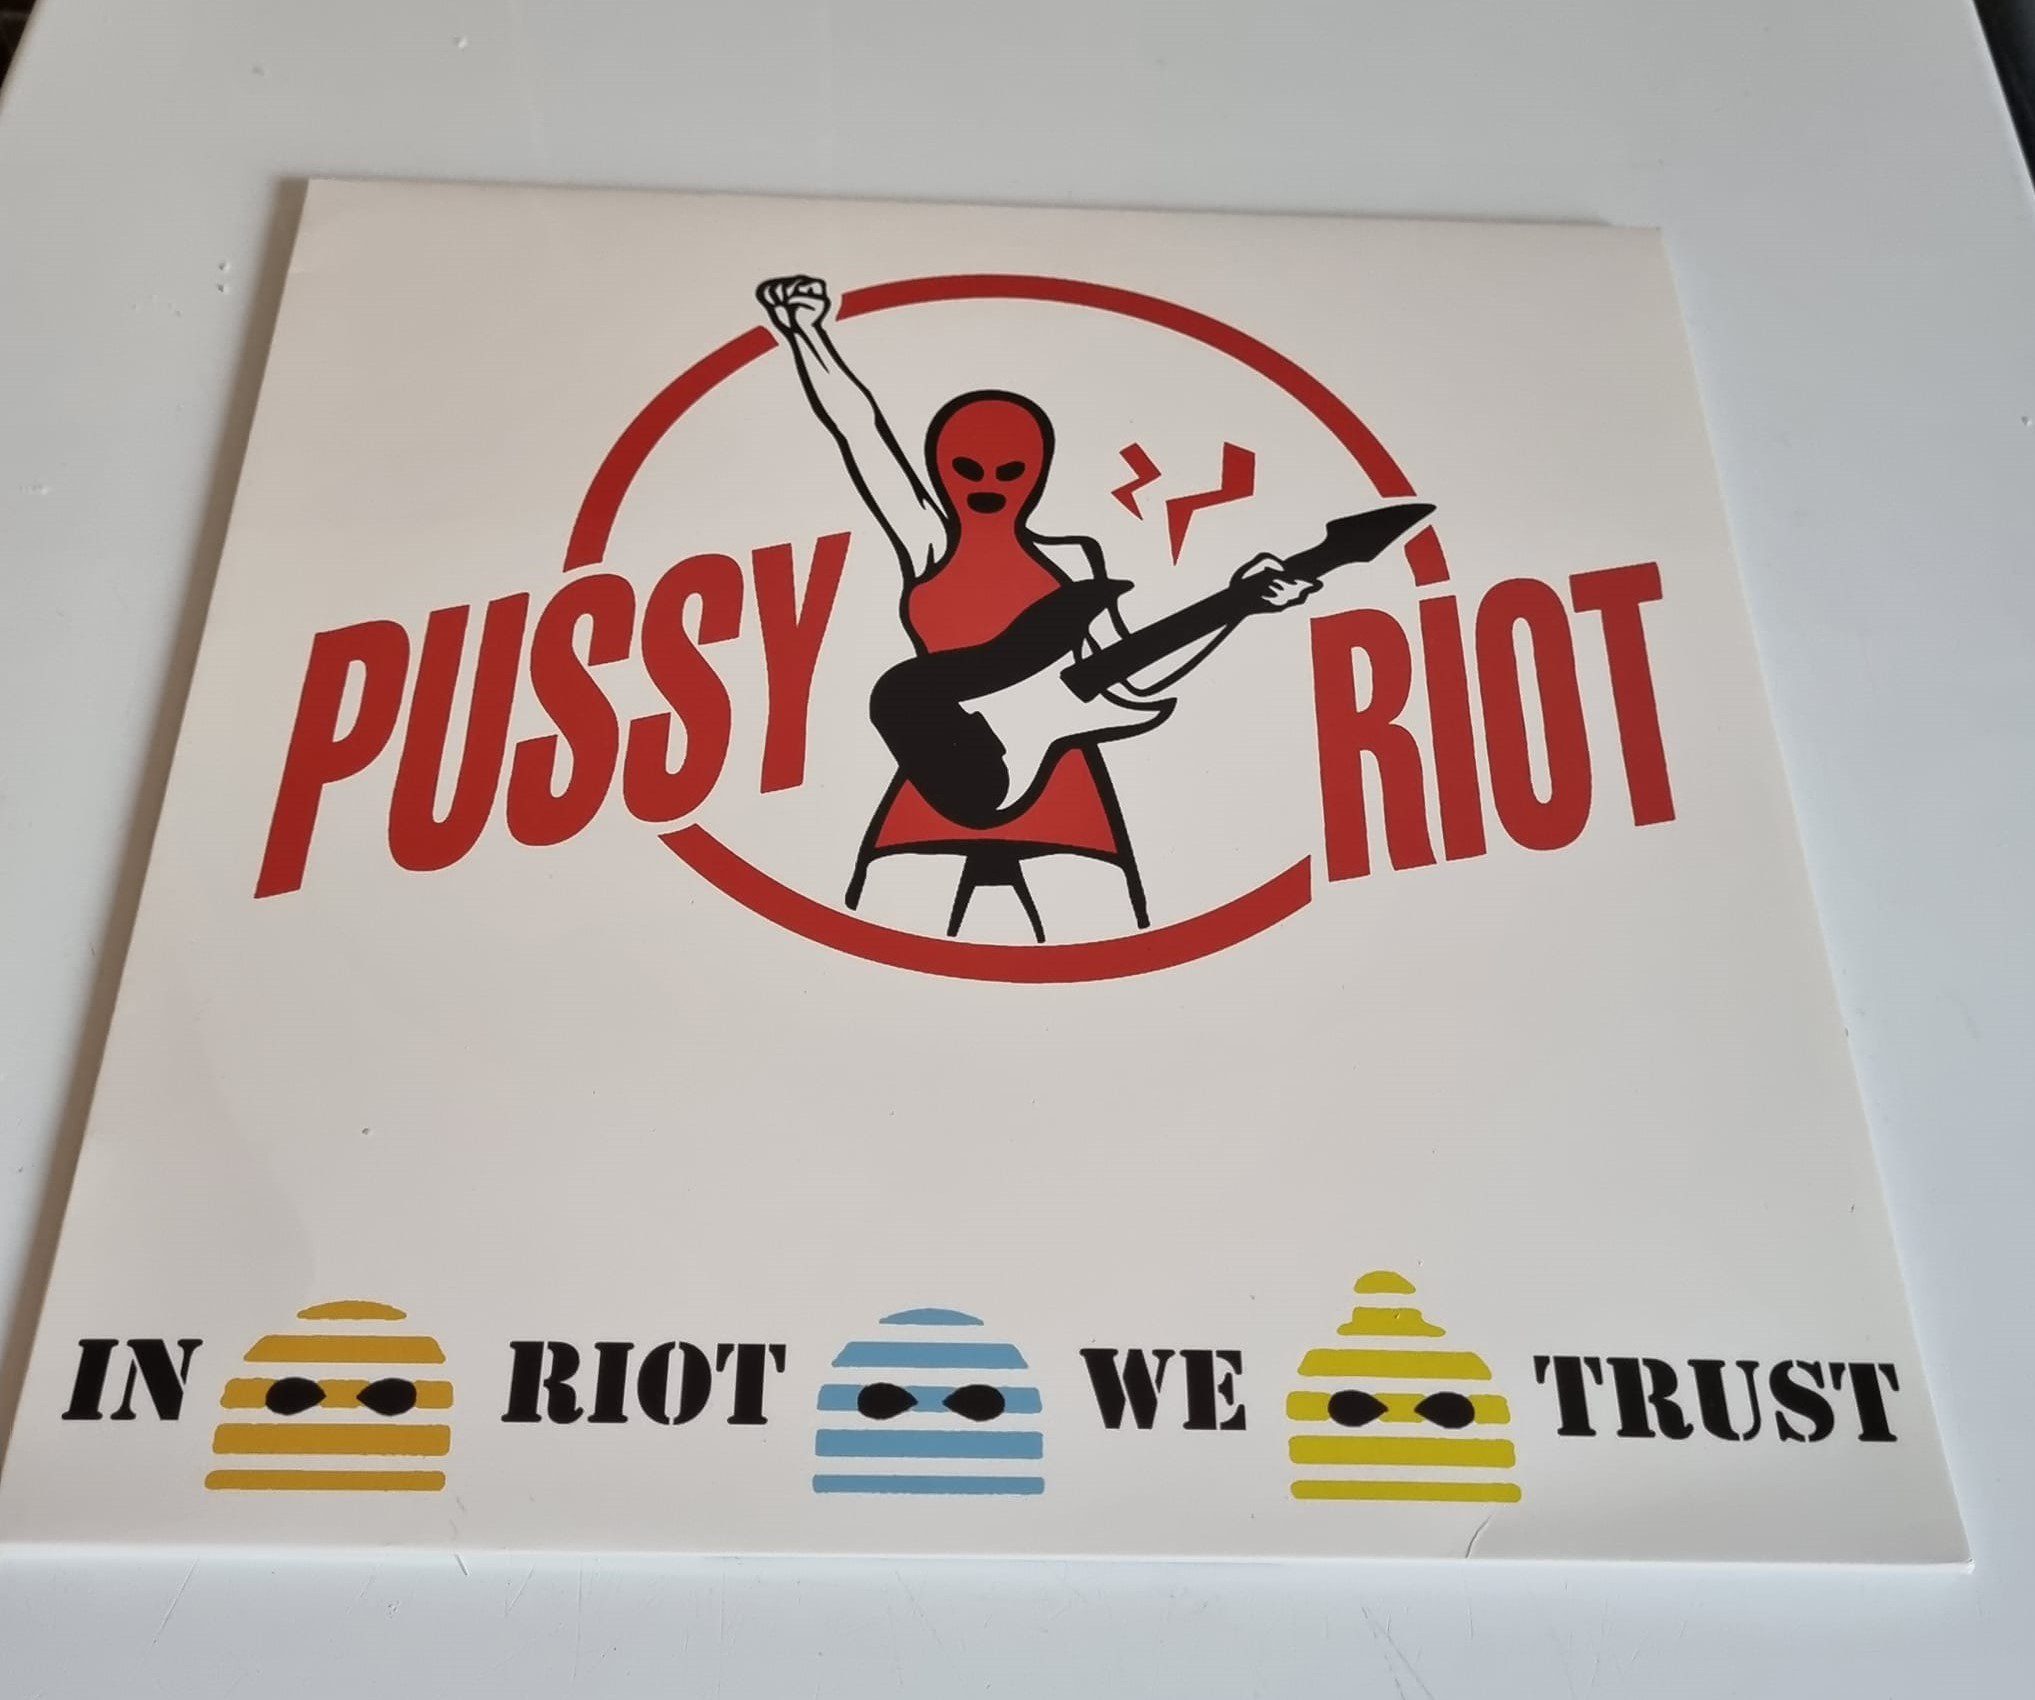 Buy this rare Pussy Riot record by clicking here